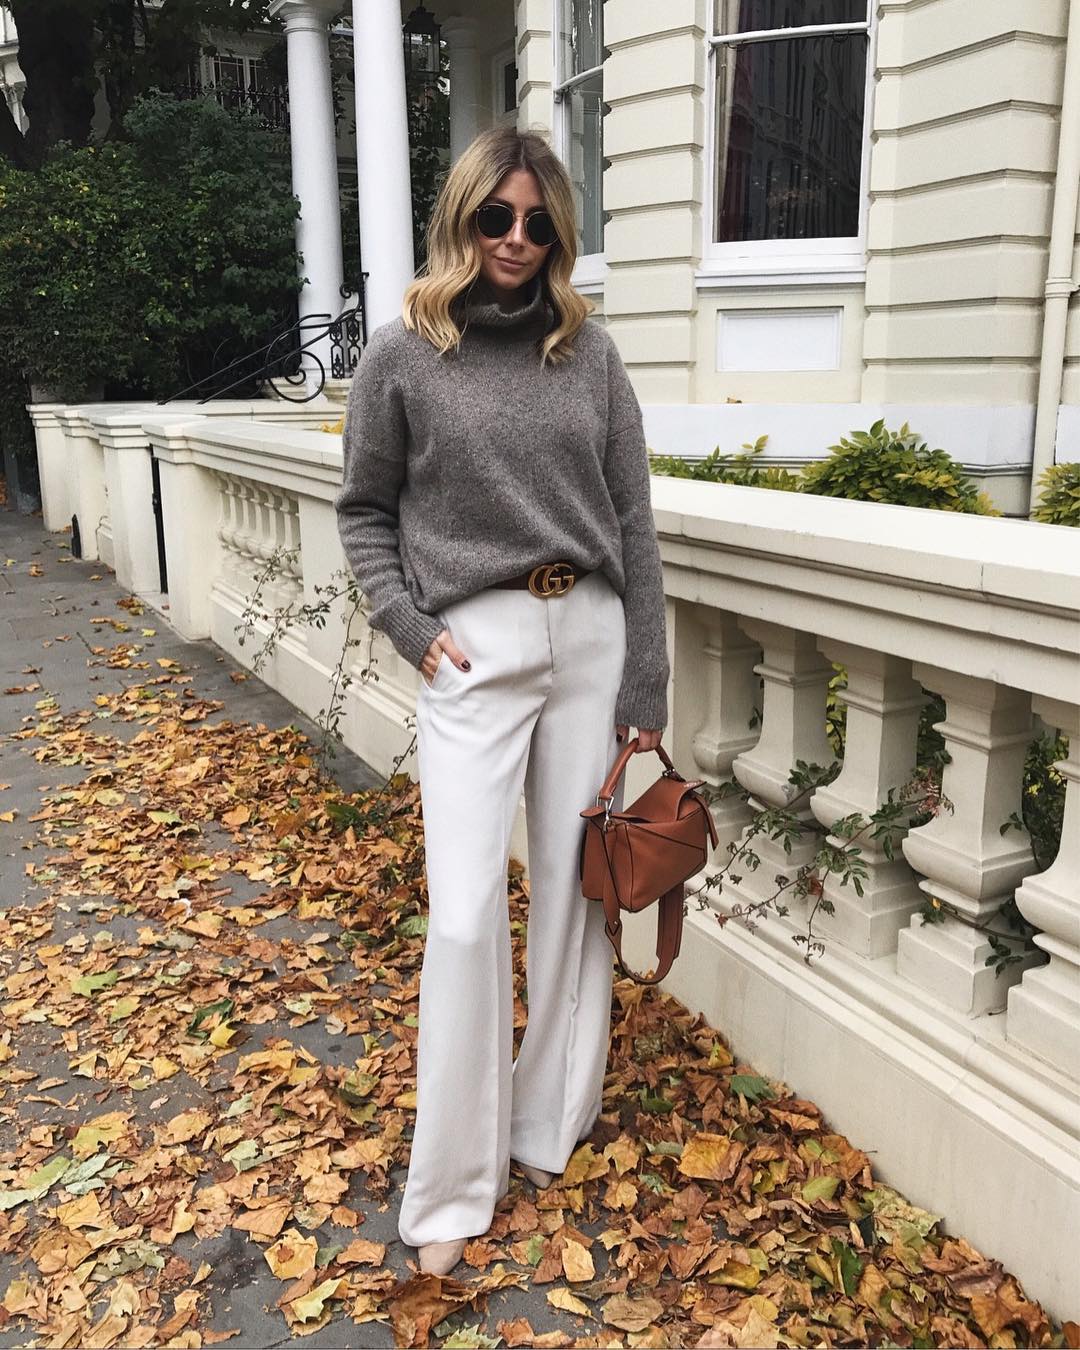 From Instagram | Blogger Style Inspiration No.14: Emma Hill, London, England